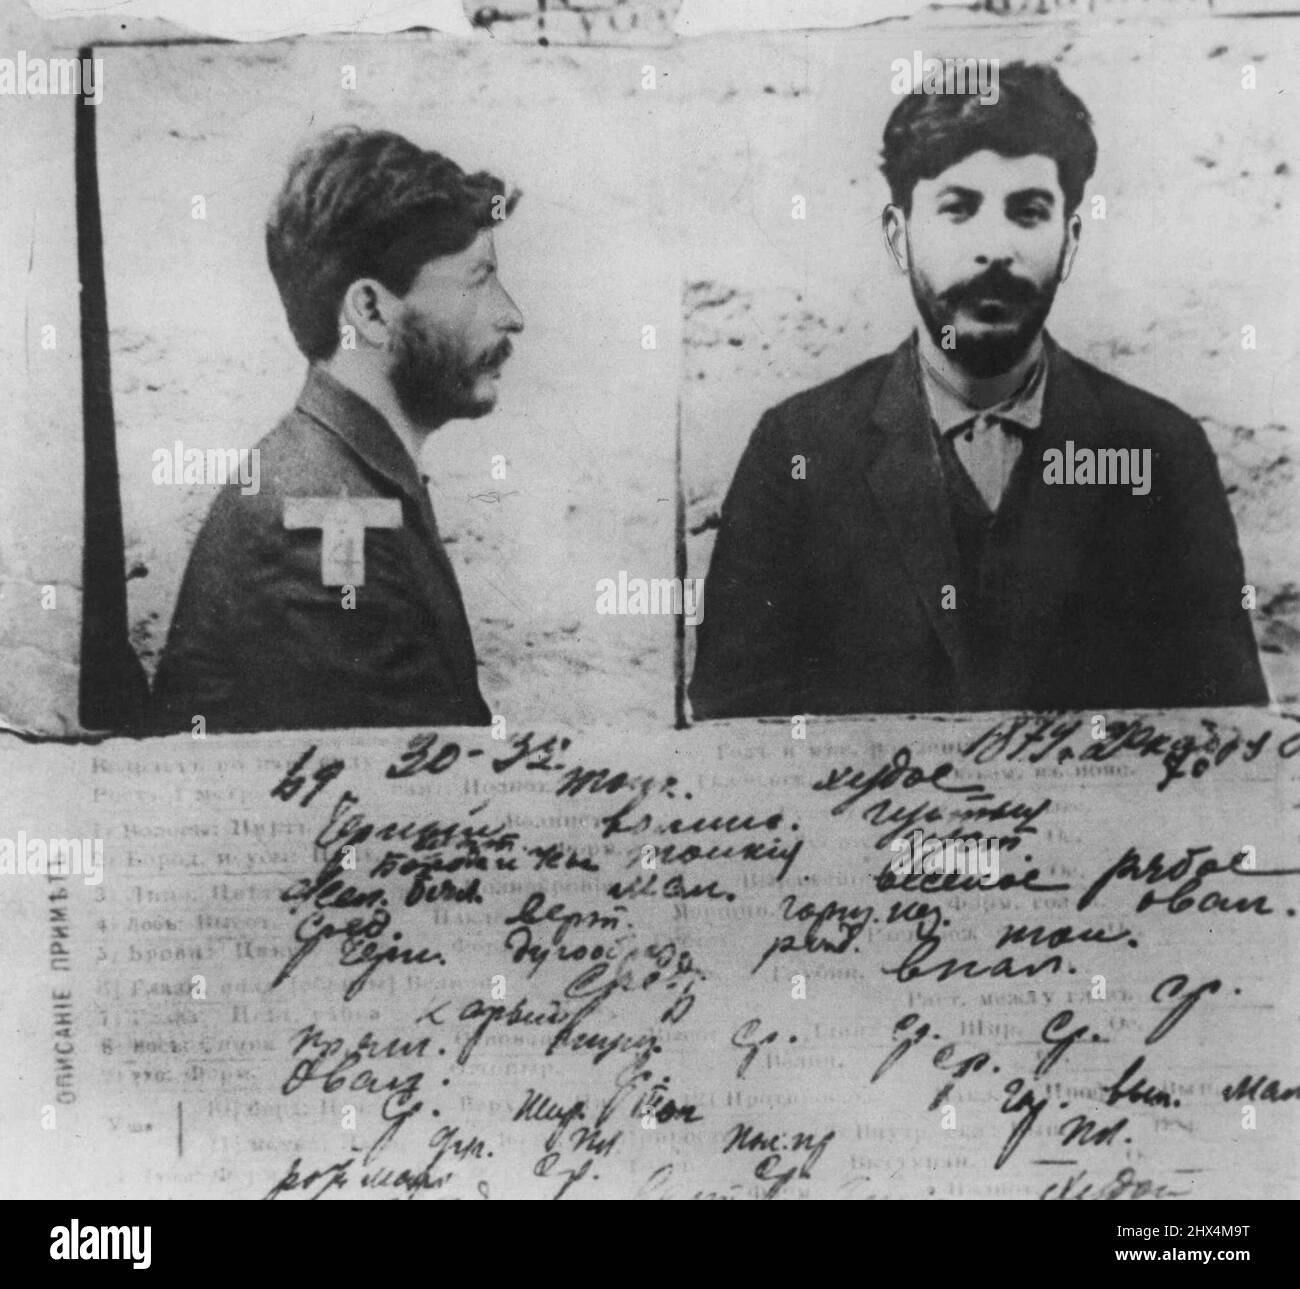 'Mugged' By Czar's Police -- This unflattering picture of Joseph Stalin was made years ago by the Czar's secret police. They caught up with Joe six times, sending him off to bleak Siberia each time. Stalin escaped five times. The last time they kept close watch on him and he had to wait four year for the 1917 revolution to free him. November 29, 1941. (Photo by ACME). Stock Photo